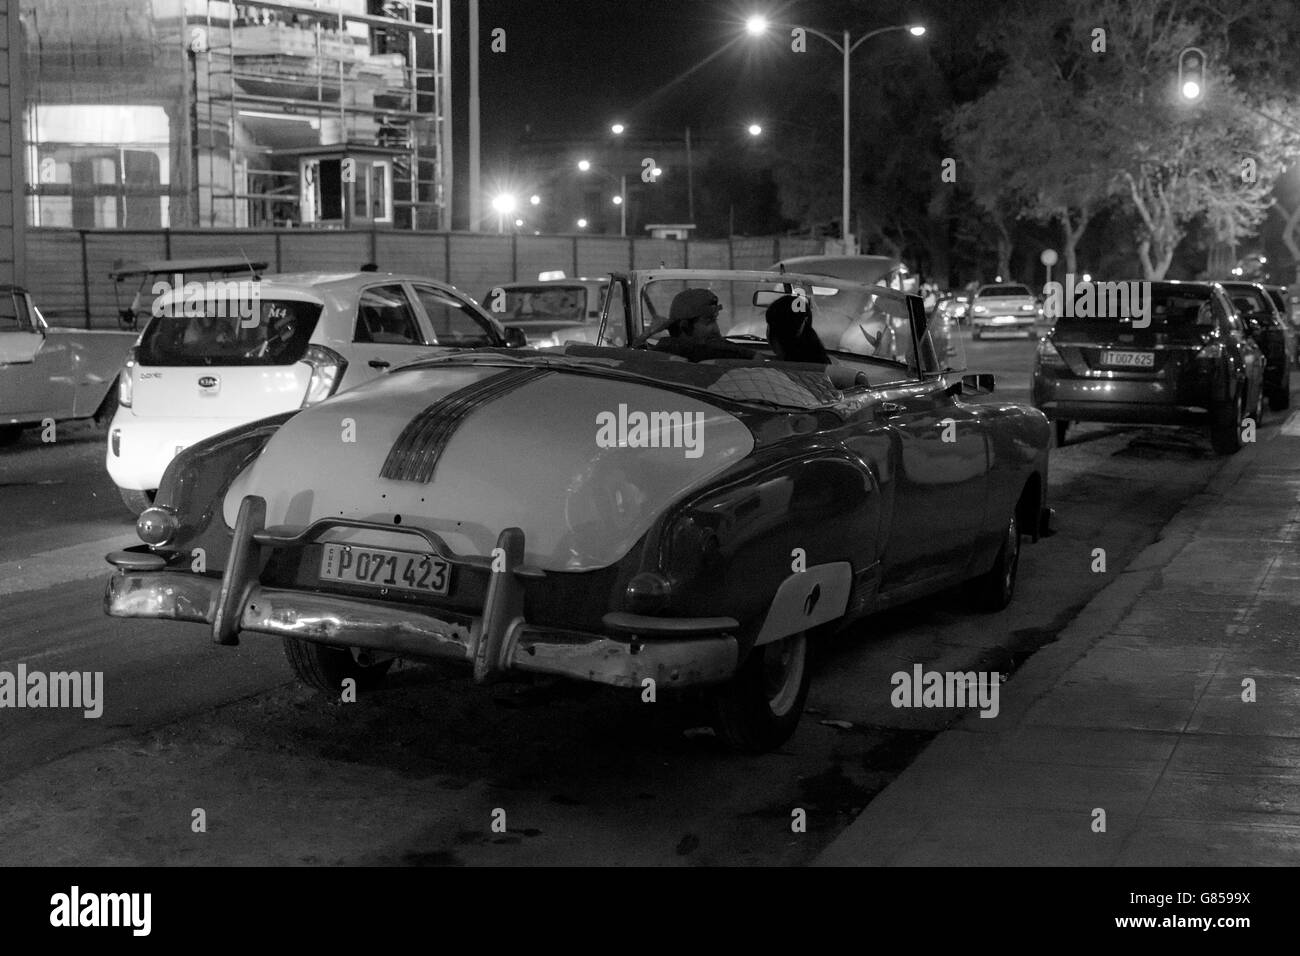 Streets of Old Havana at night with old American cars. Black & white image Stock Photo